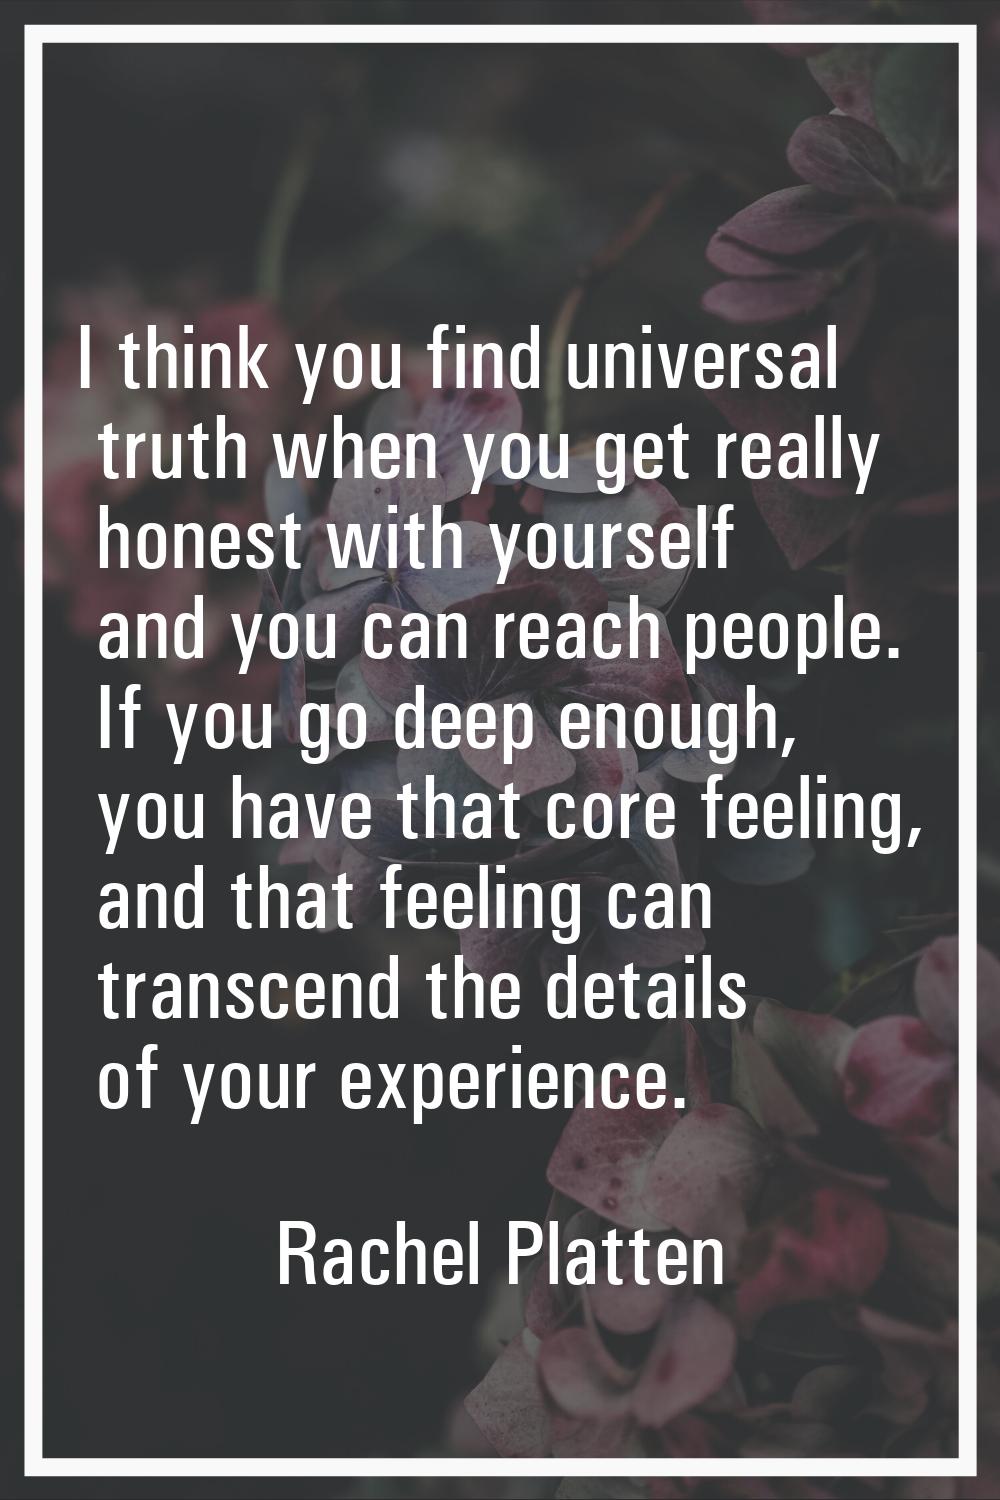 I think you find universal truth when you get really honest with yourself and you can reach people.